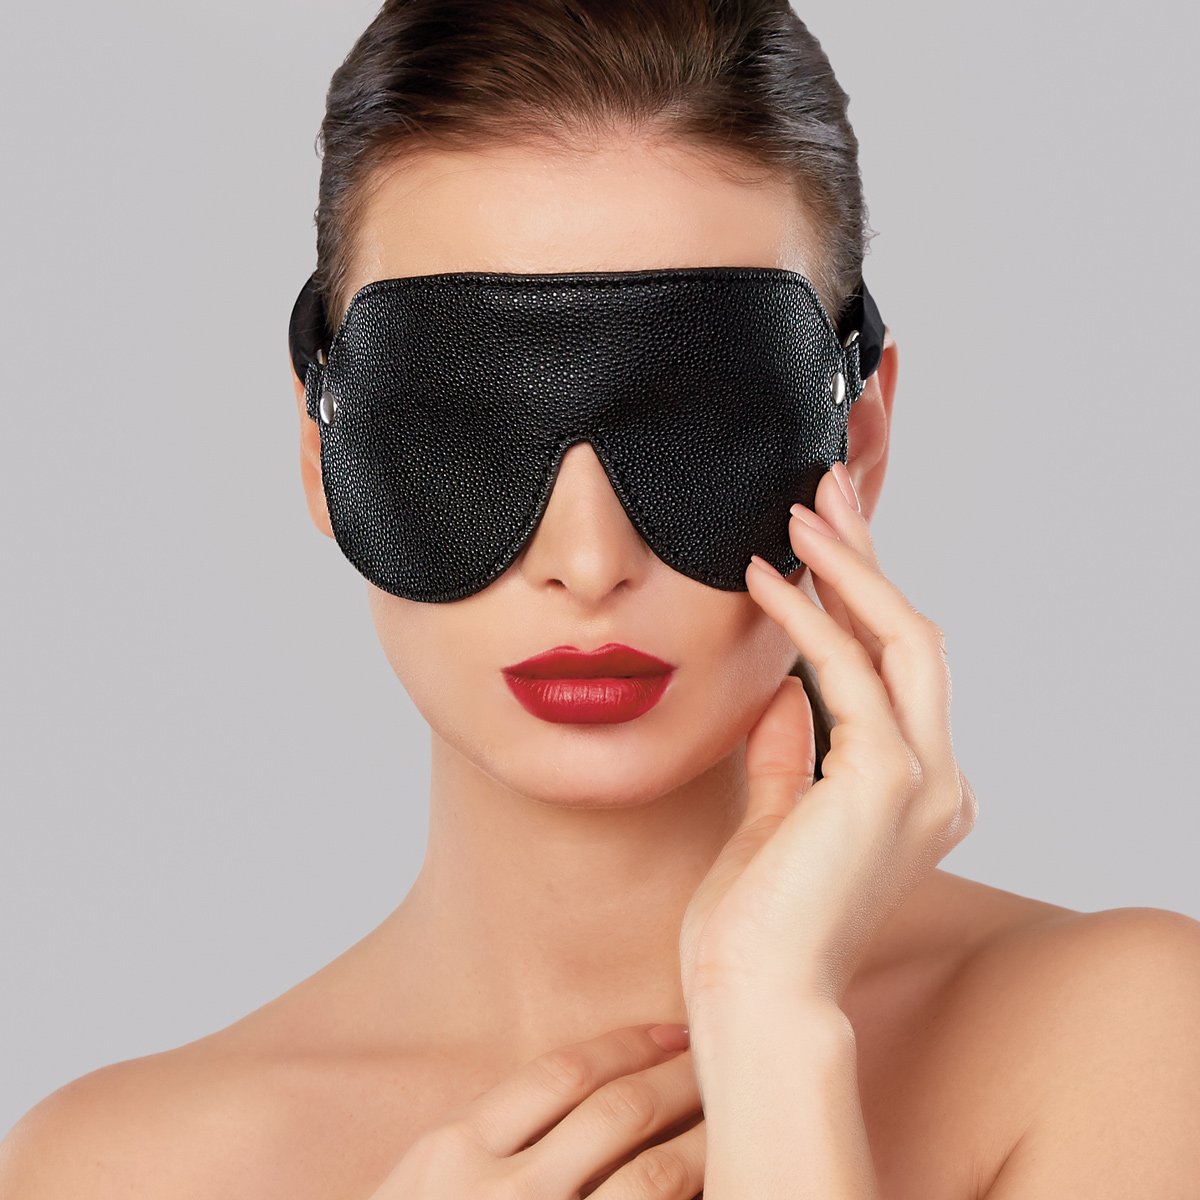 Allure Adore – Pebbled Faux Leather Reversible Mask - Black